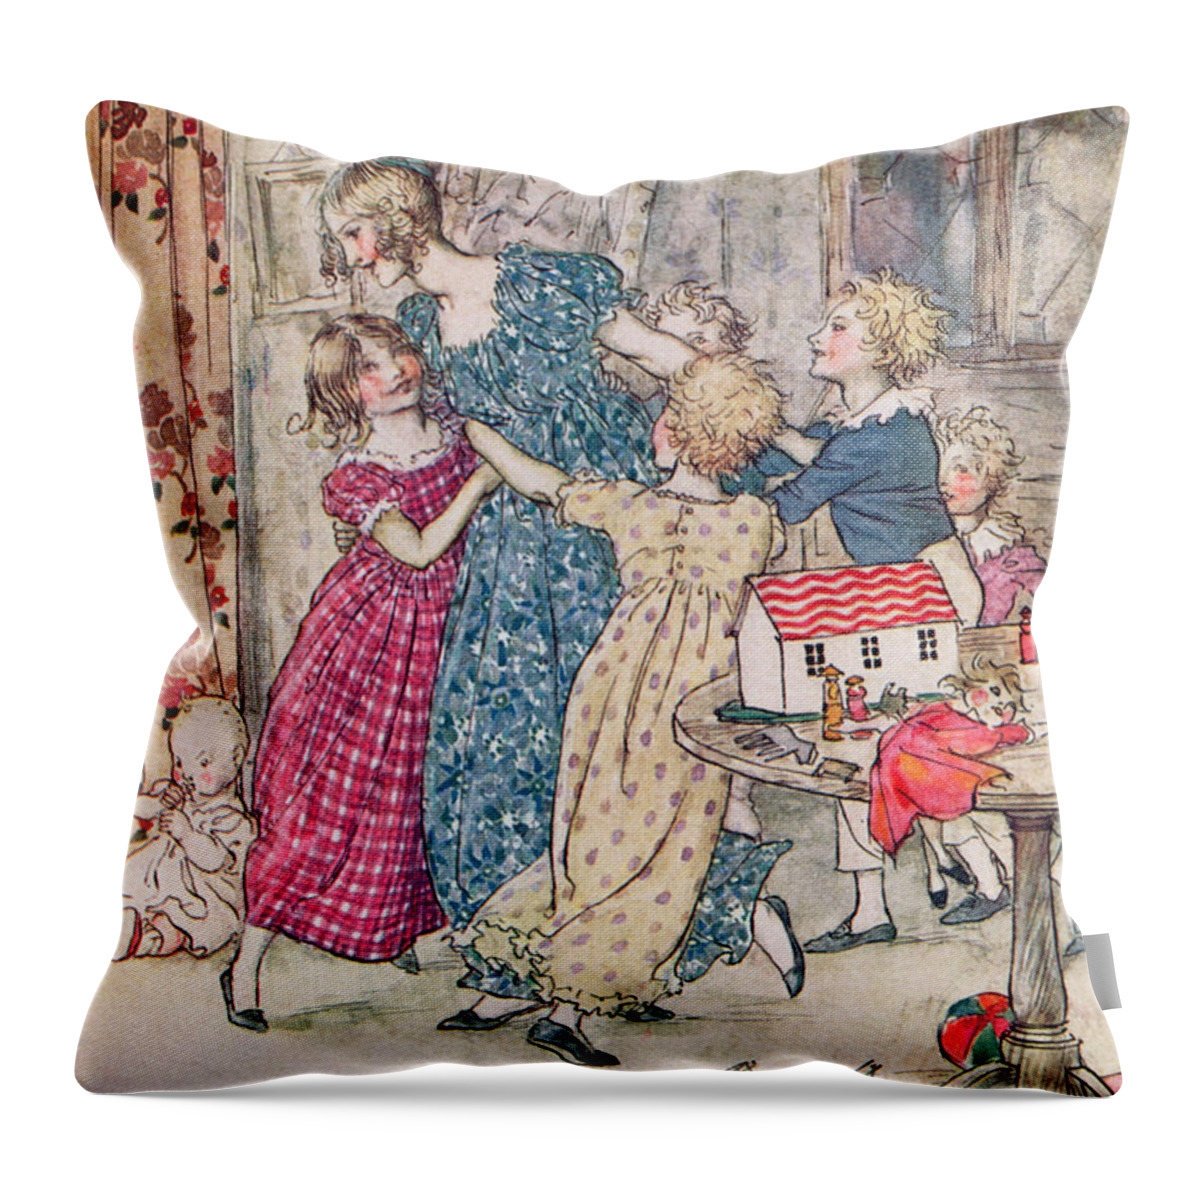 Children Throw Pillow featuring the painting A Flushed And Boisterous Group, Book Illustration by Arthur Rackham